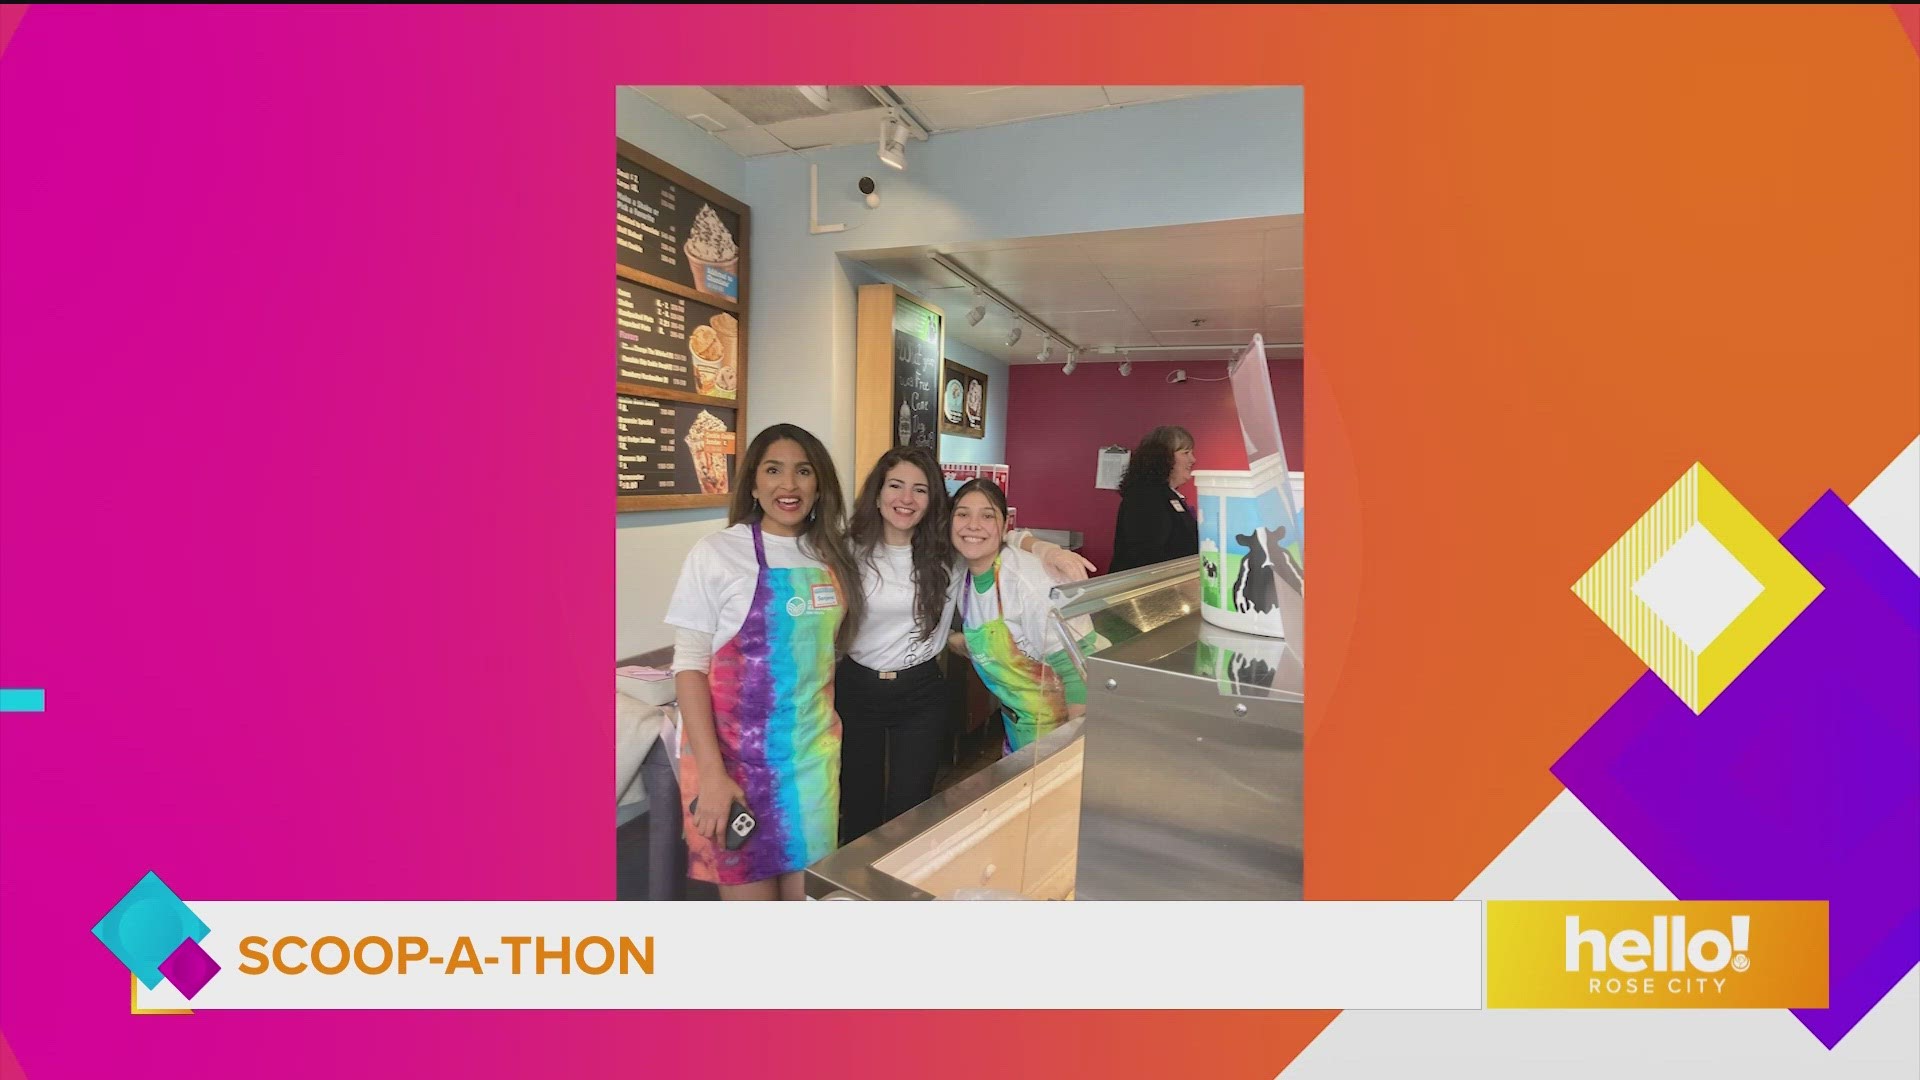 Scoop-a-thon is a fundraising event for New Avenues for Youth